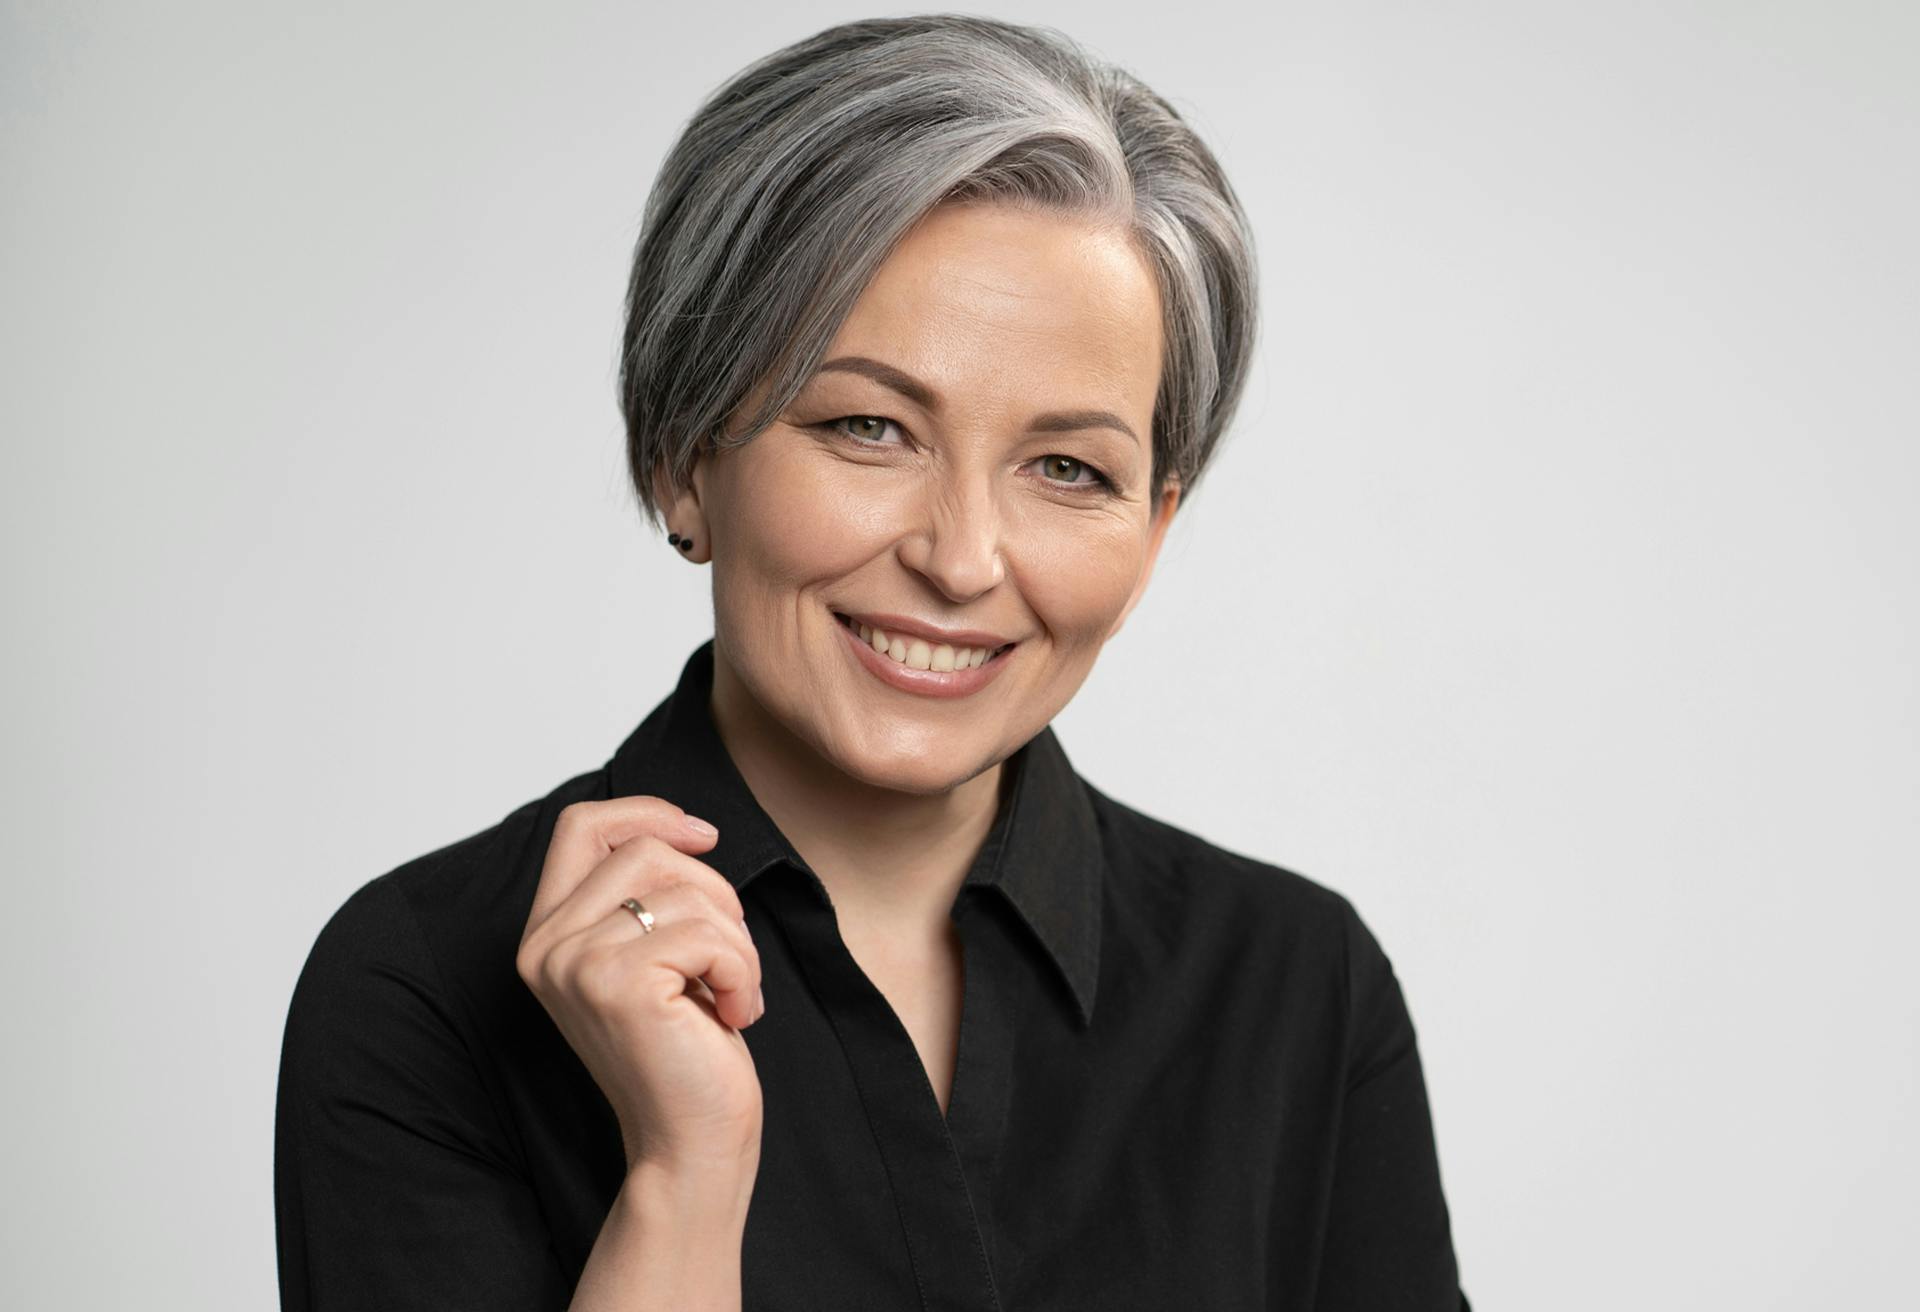 woman with short grey hair